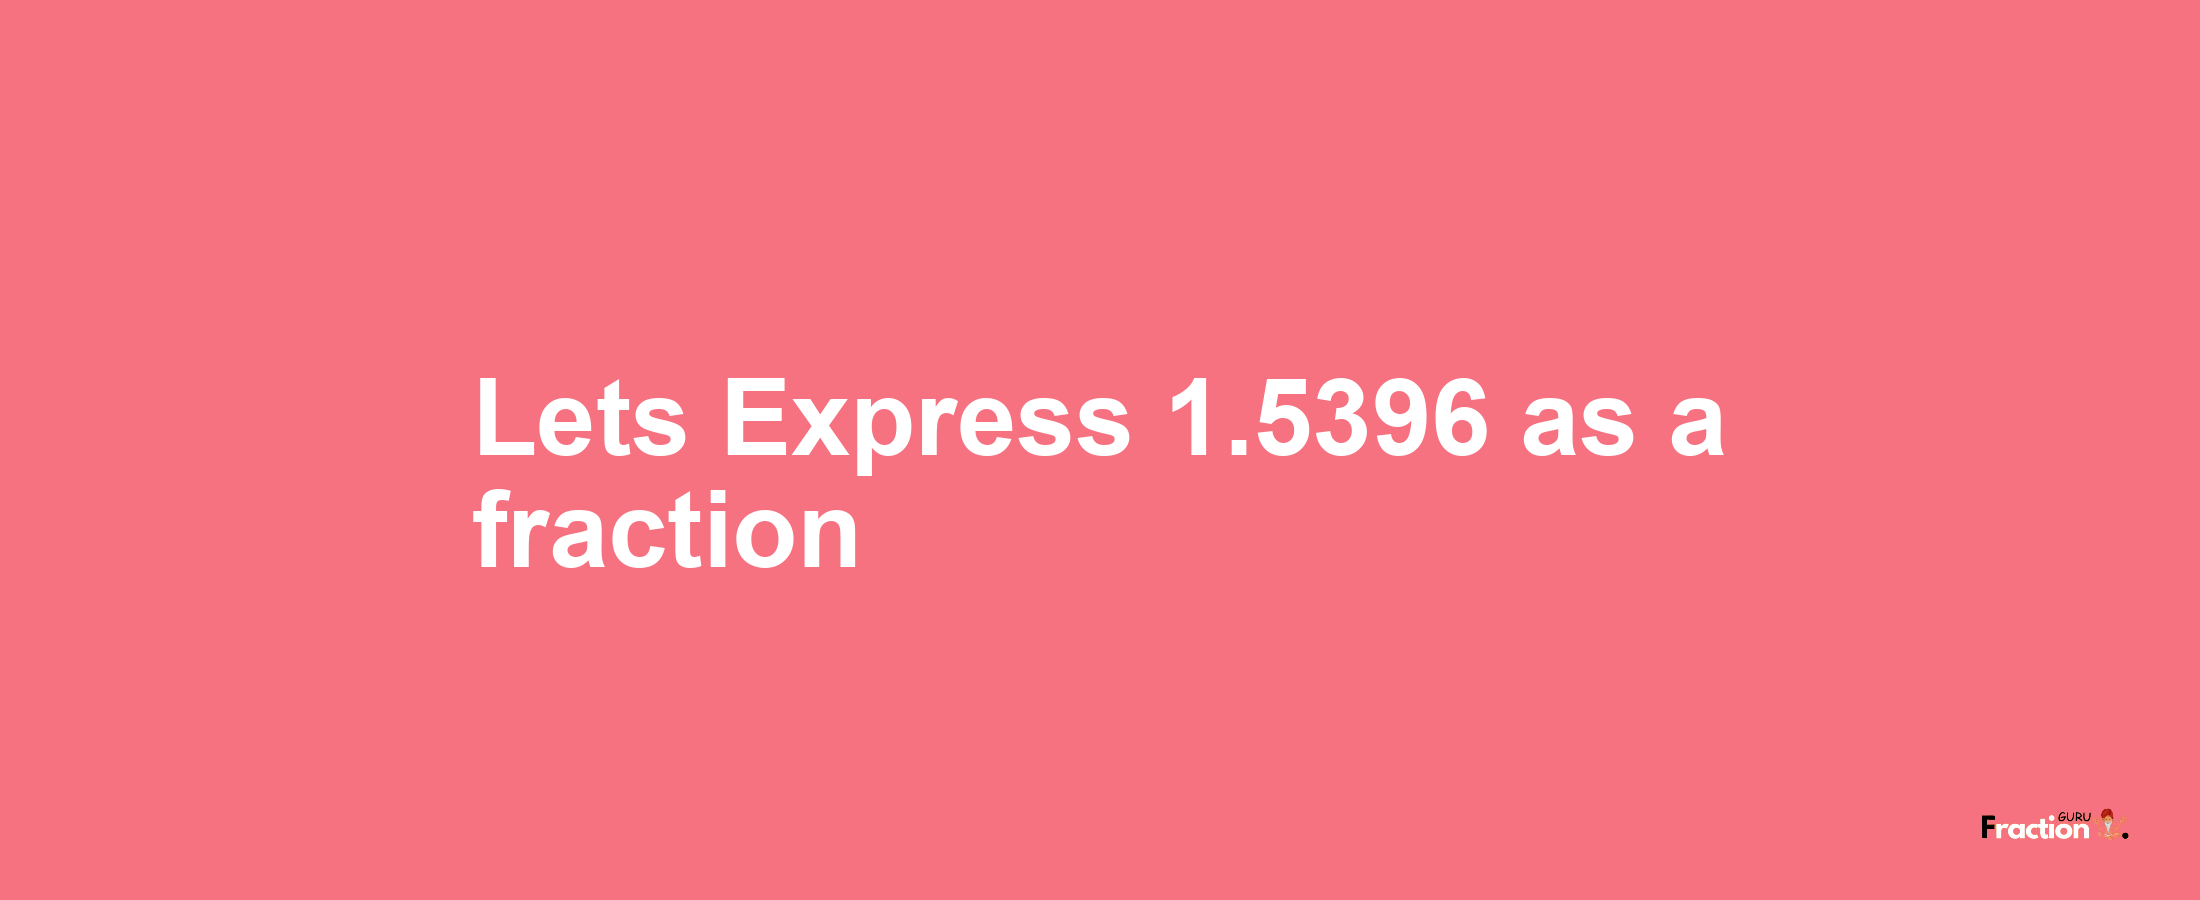 Lets Express 1.5396 as afraction